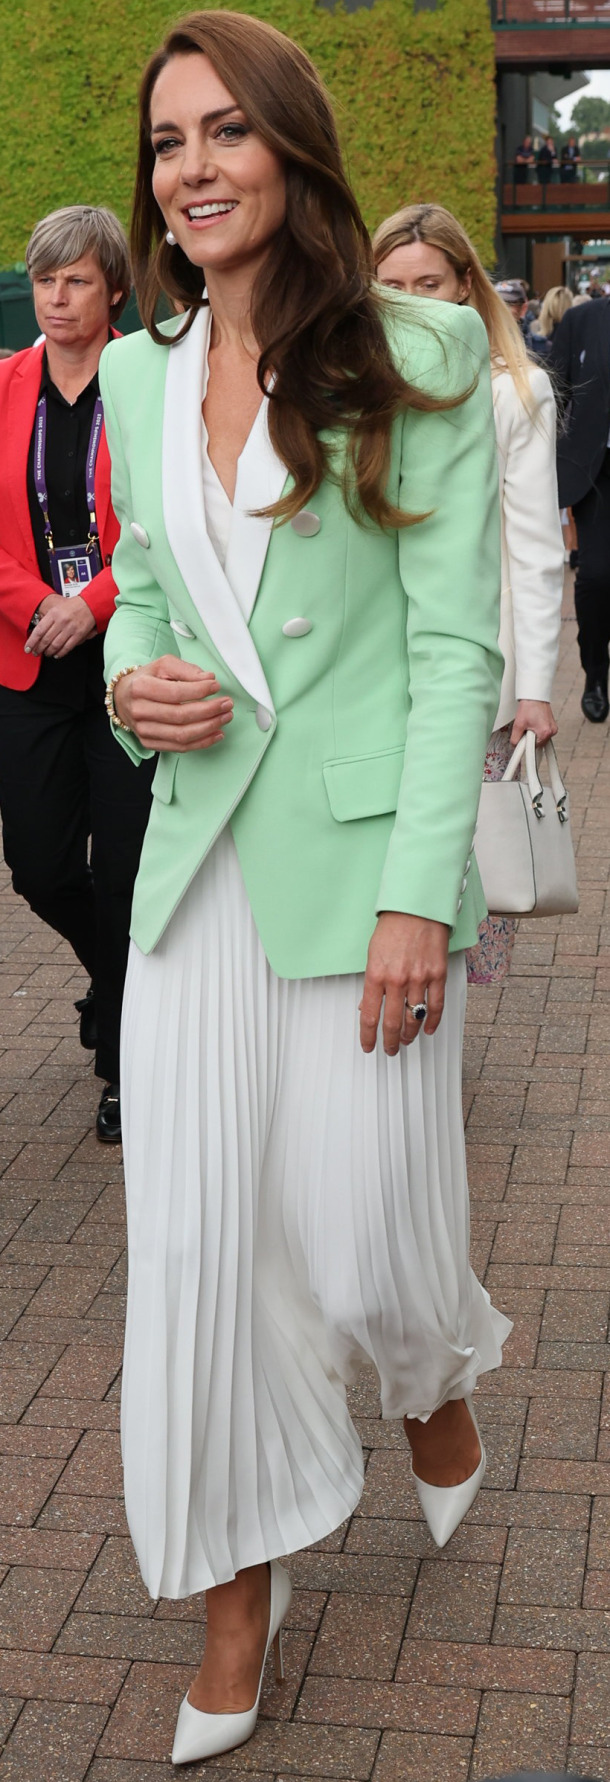 Kate Middleton wears green and white outfit to the second day of Wimbledon